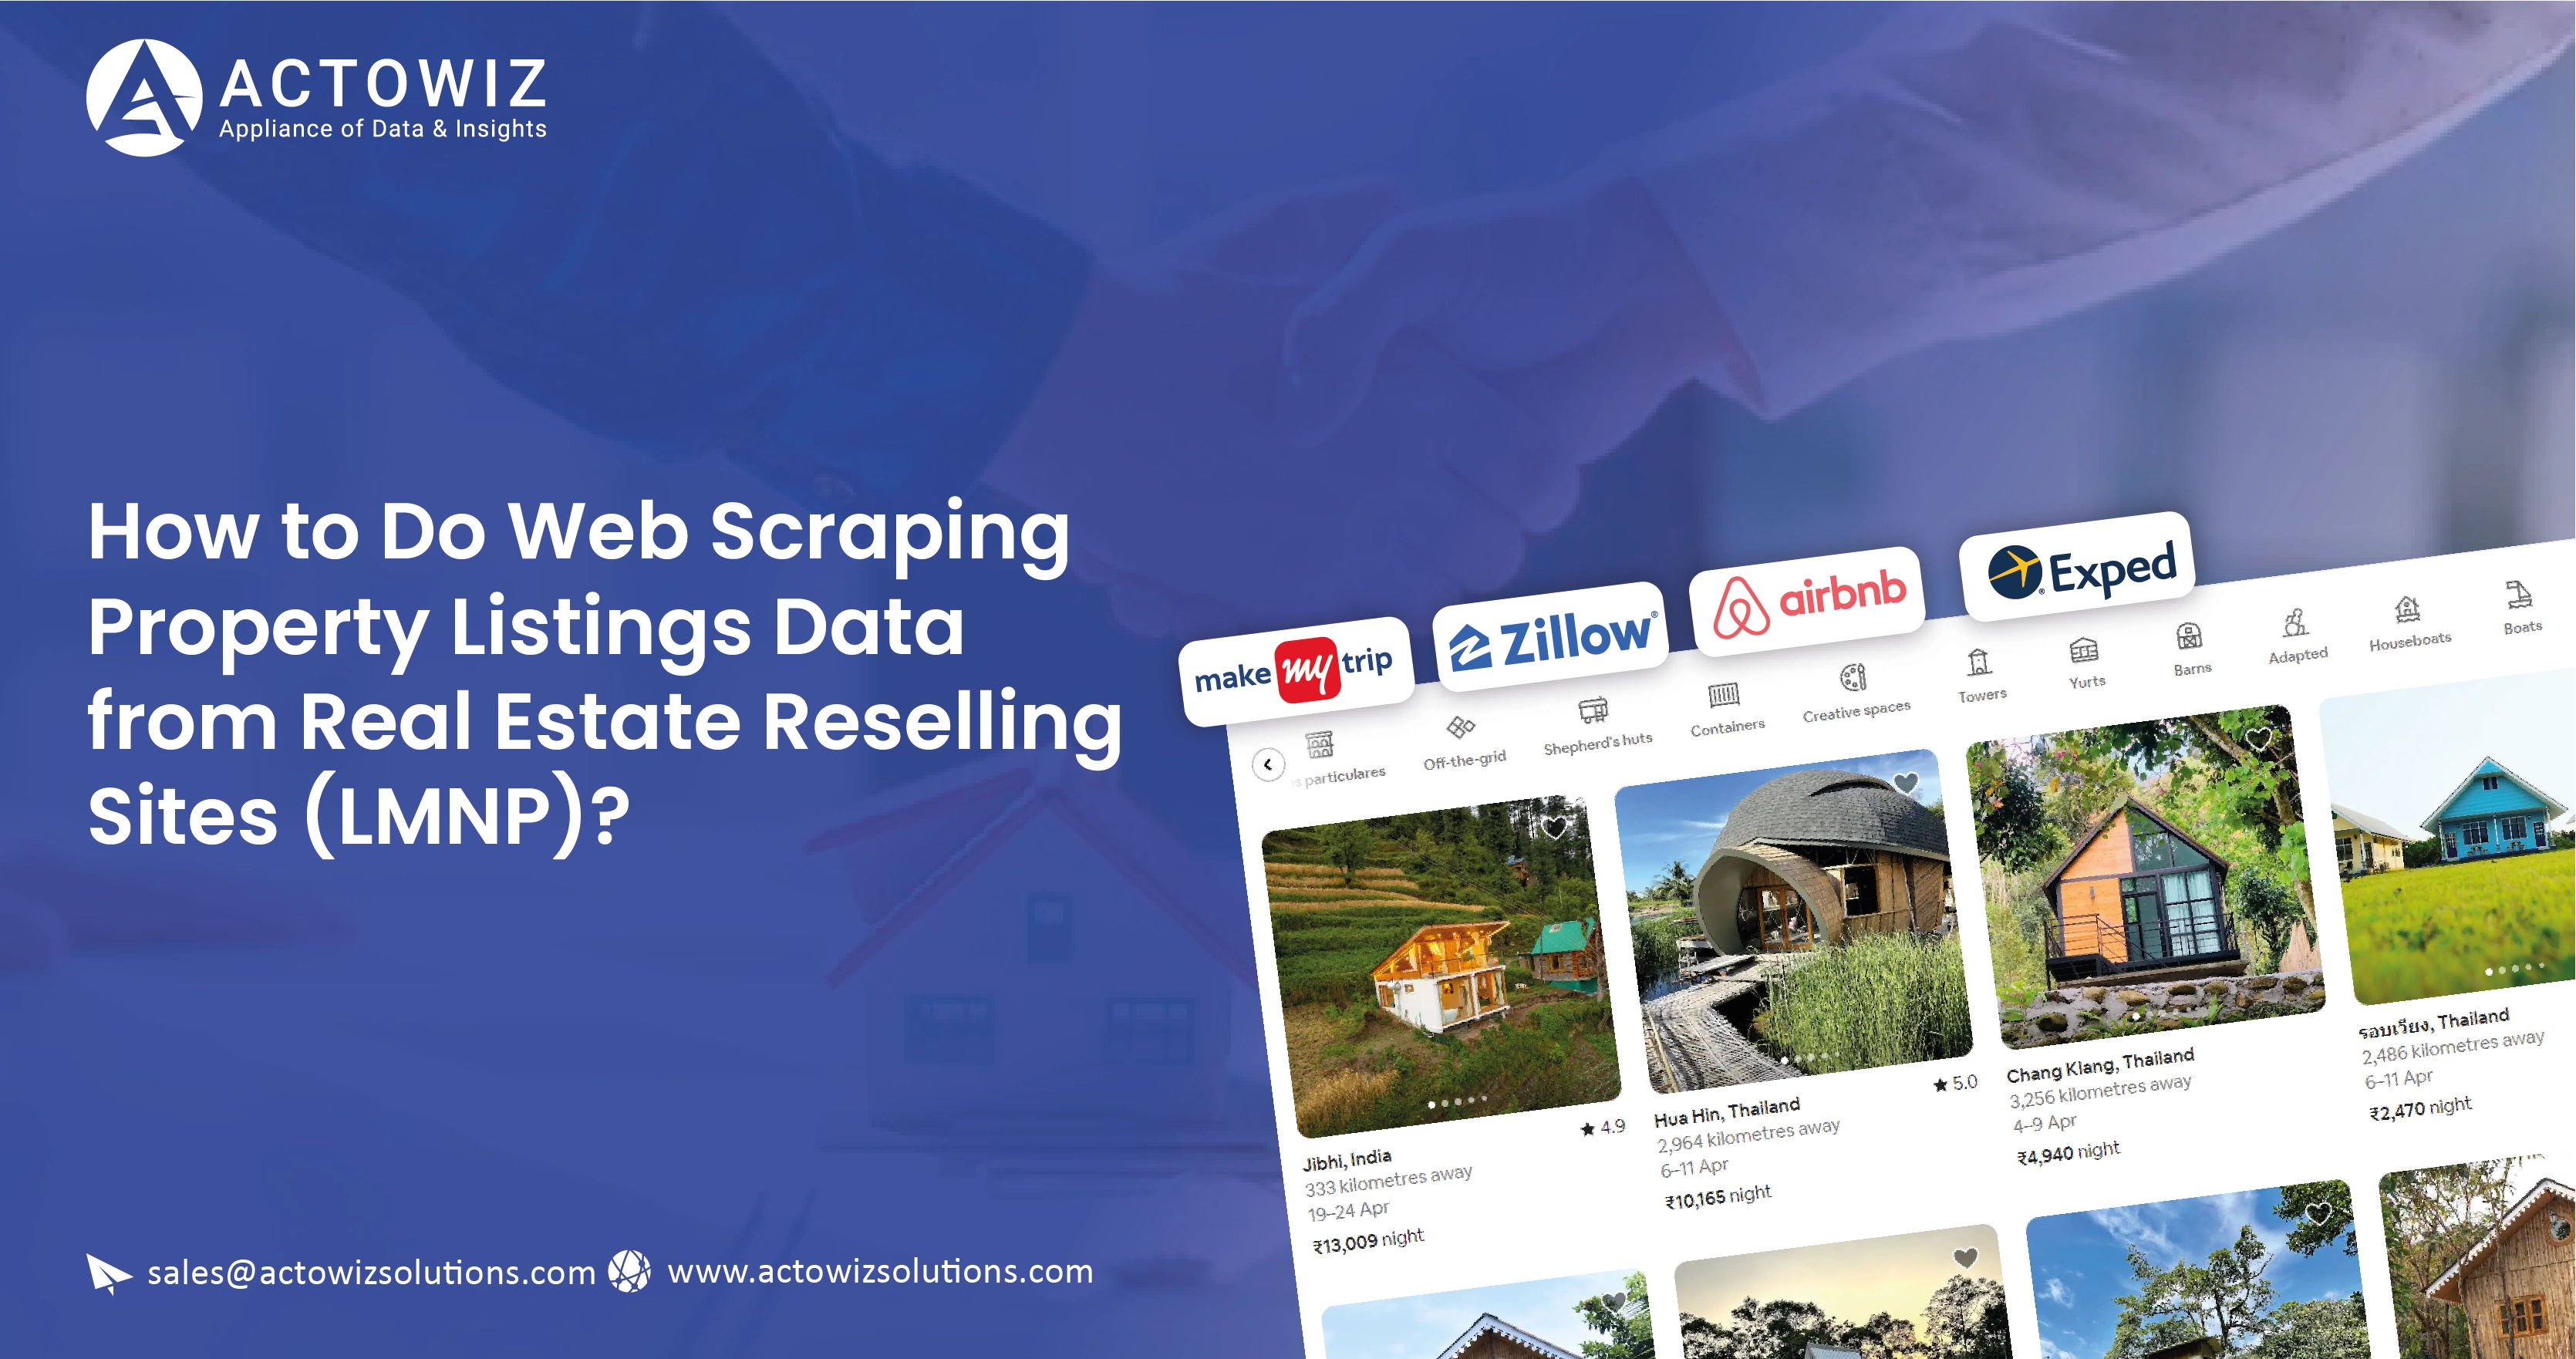 How-to-Do-Web-Scraping-Property-Listings-Data-from-Real-Estate-Reselling-Sites-(LMNP)